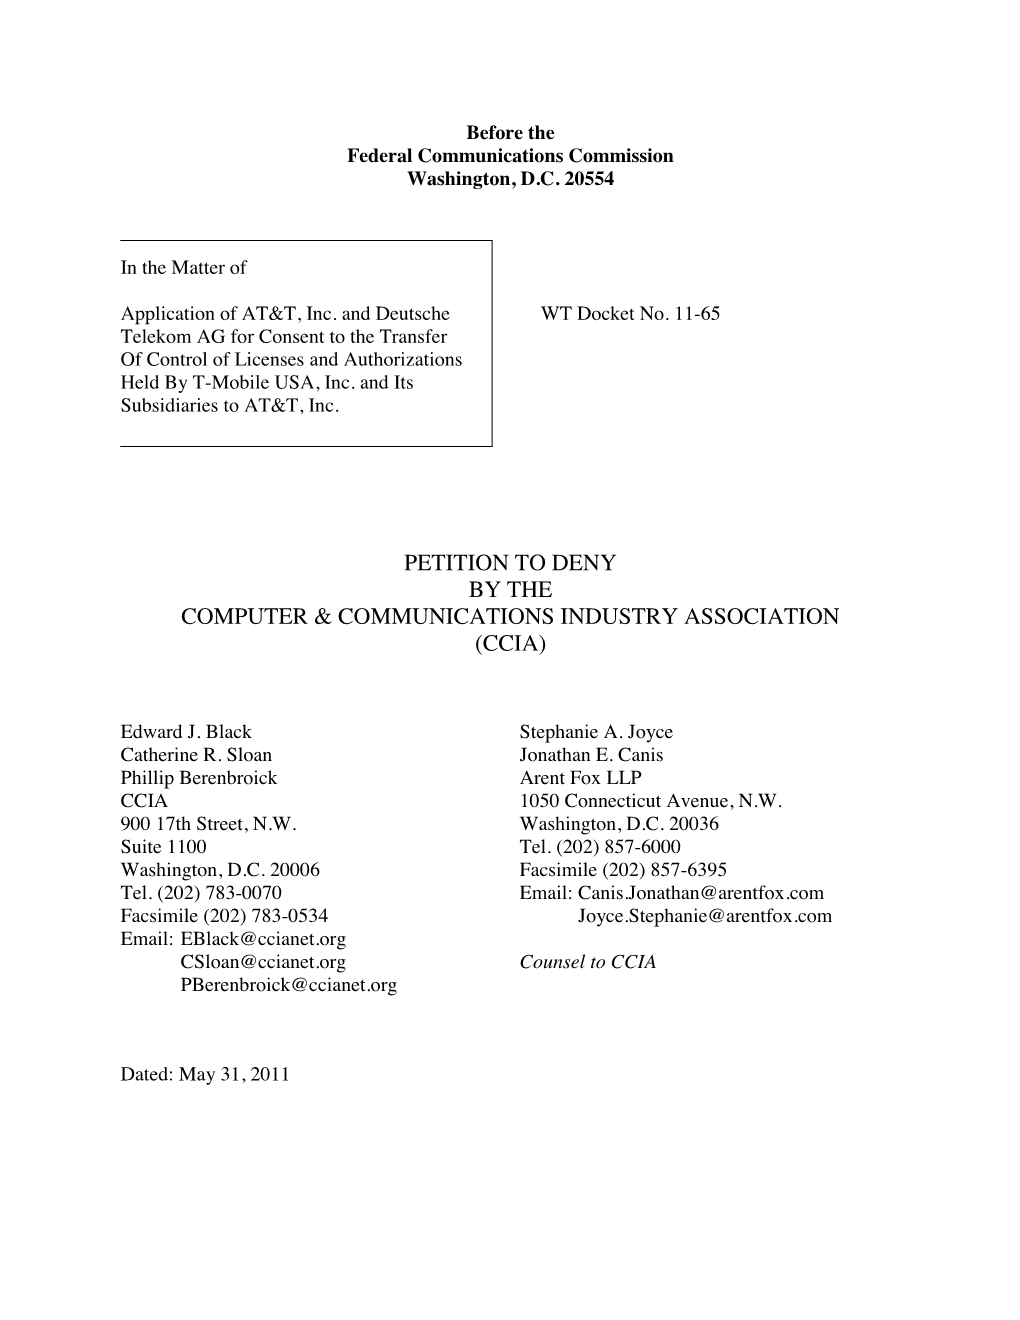 CCIA's Petition to Deny AT&T/T-Mobile Merger